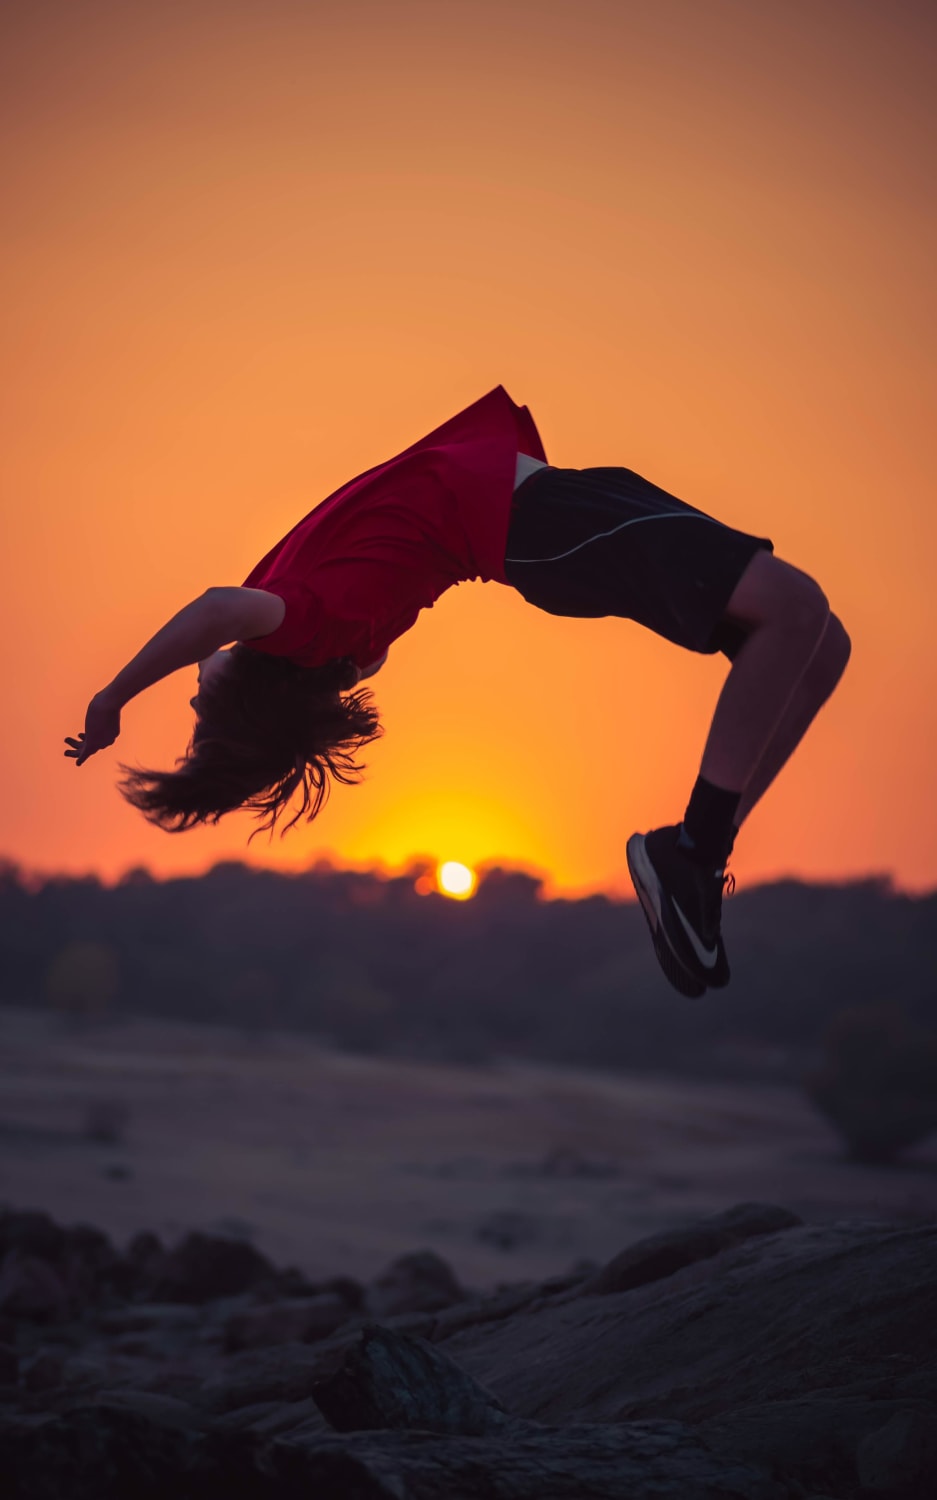 Flipping over the sunset